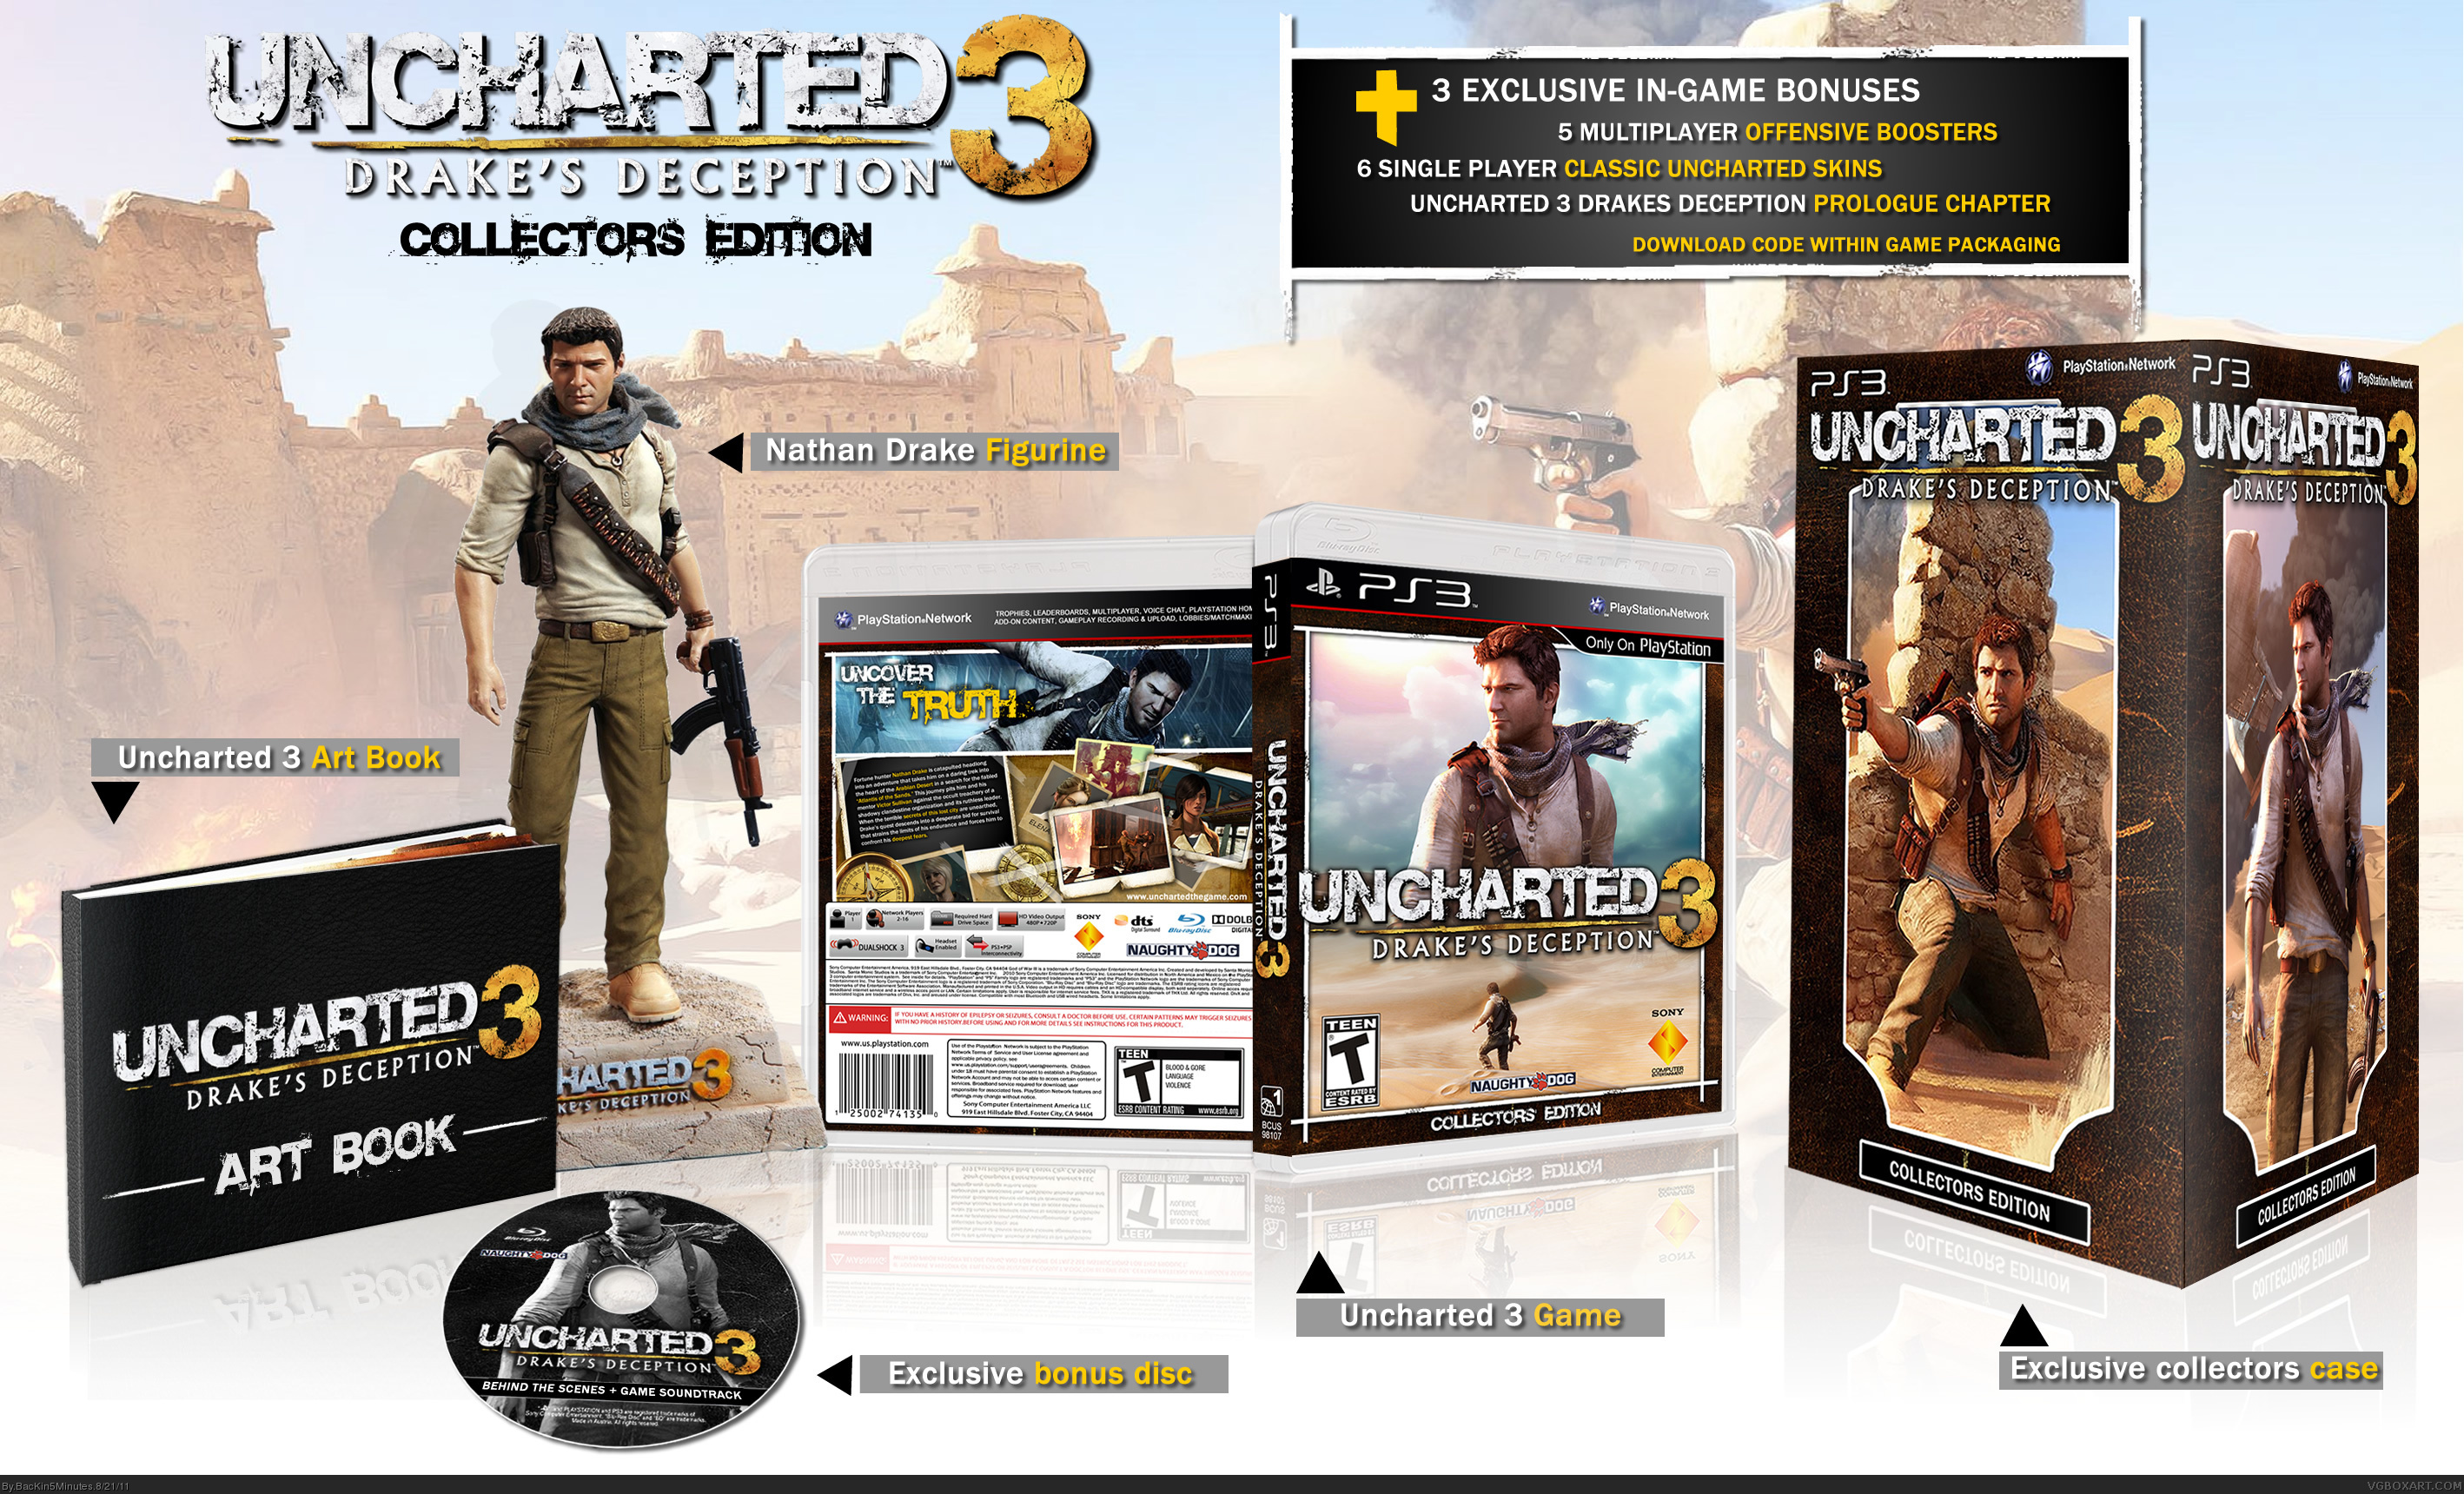 Uncharted 3: Drake's Deception Collectors Edition box cover